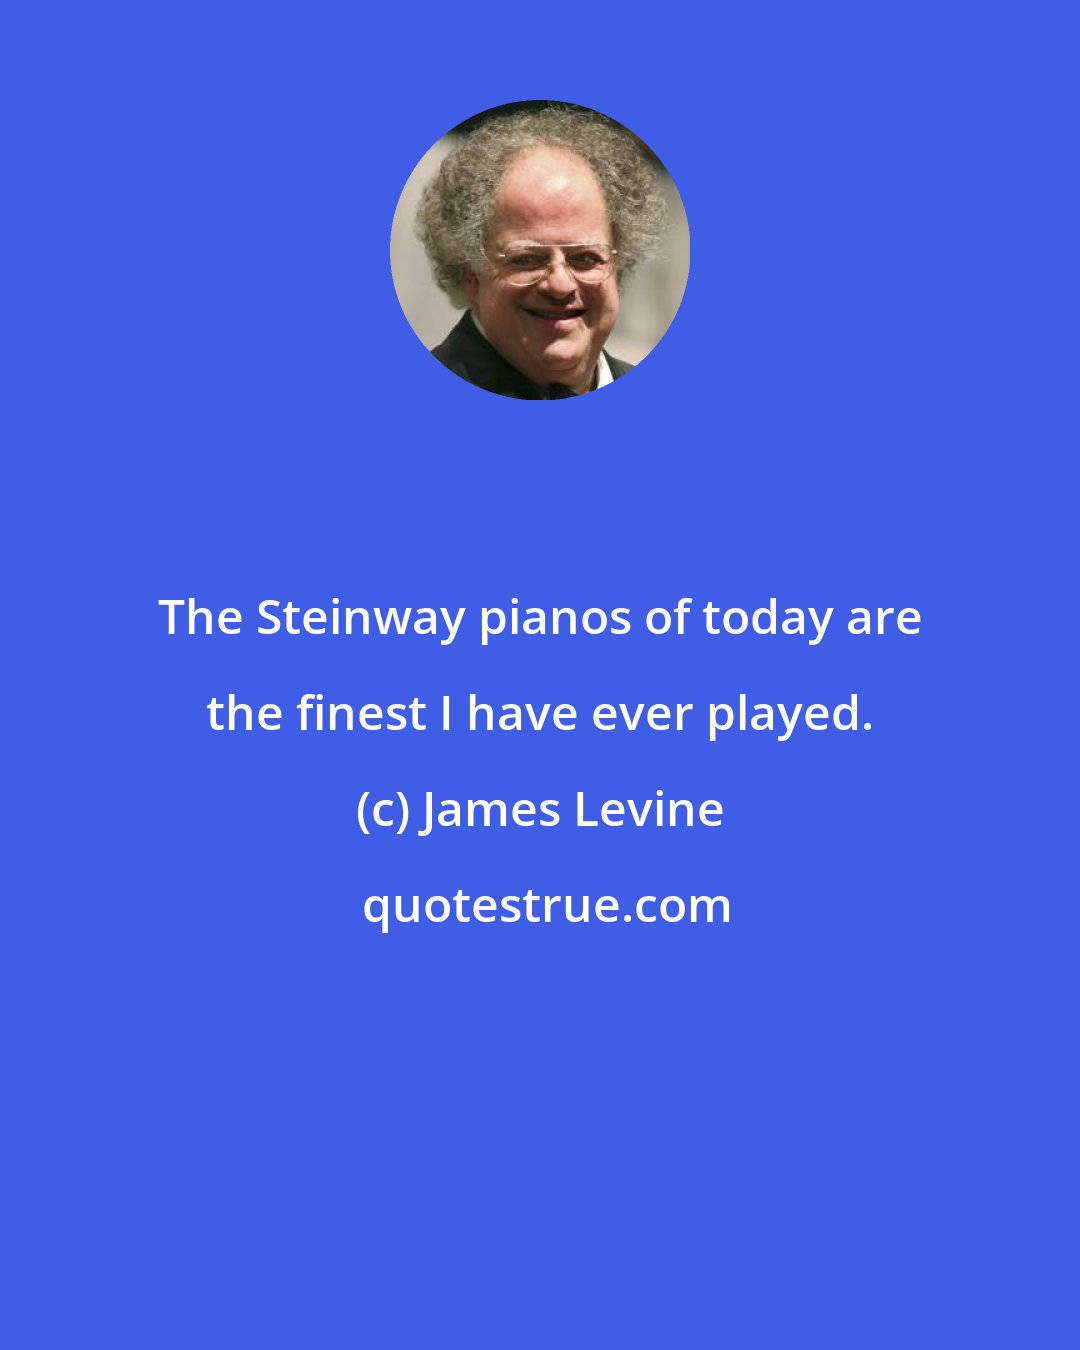 James Levine: The Steinway pianos of today are the finest I have ever played.